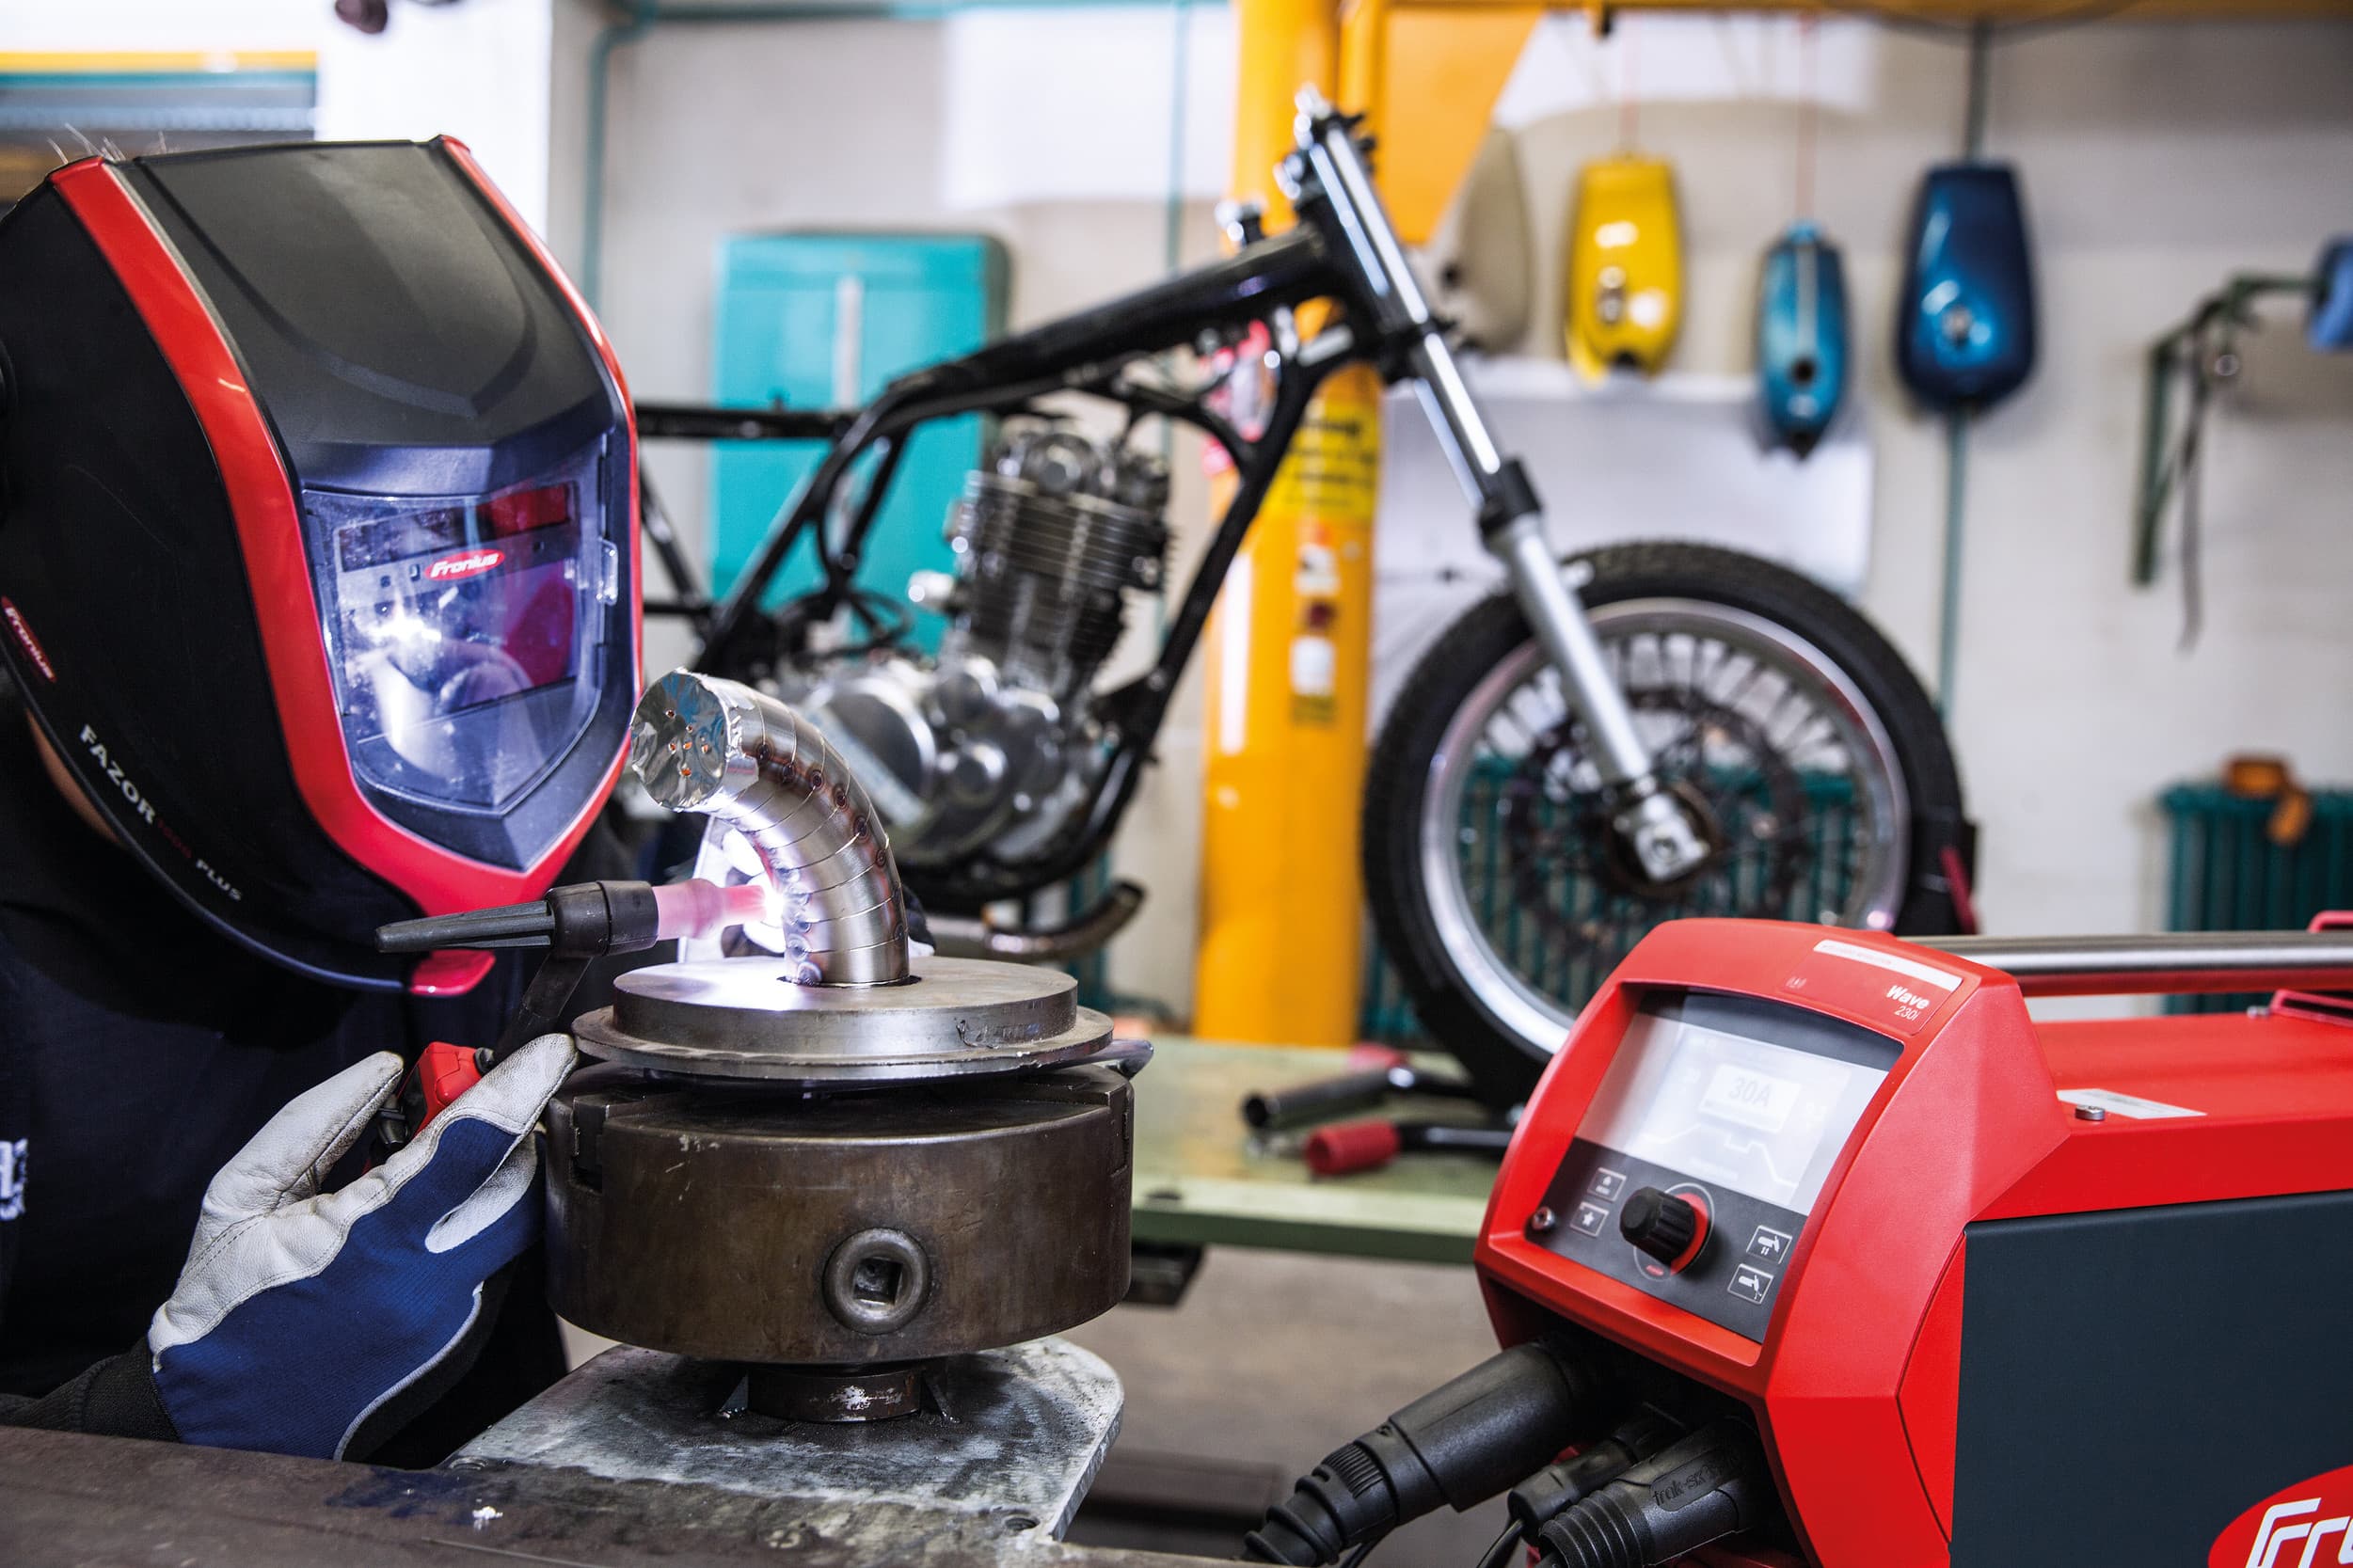 A Fronius magicwave 230i welding a stainless steel tube for a motorcycle.